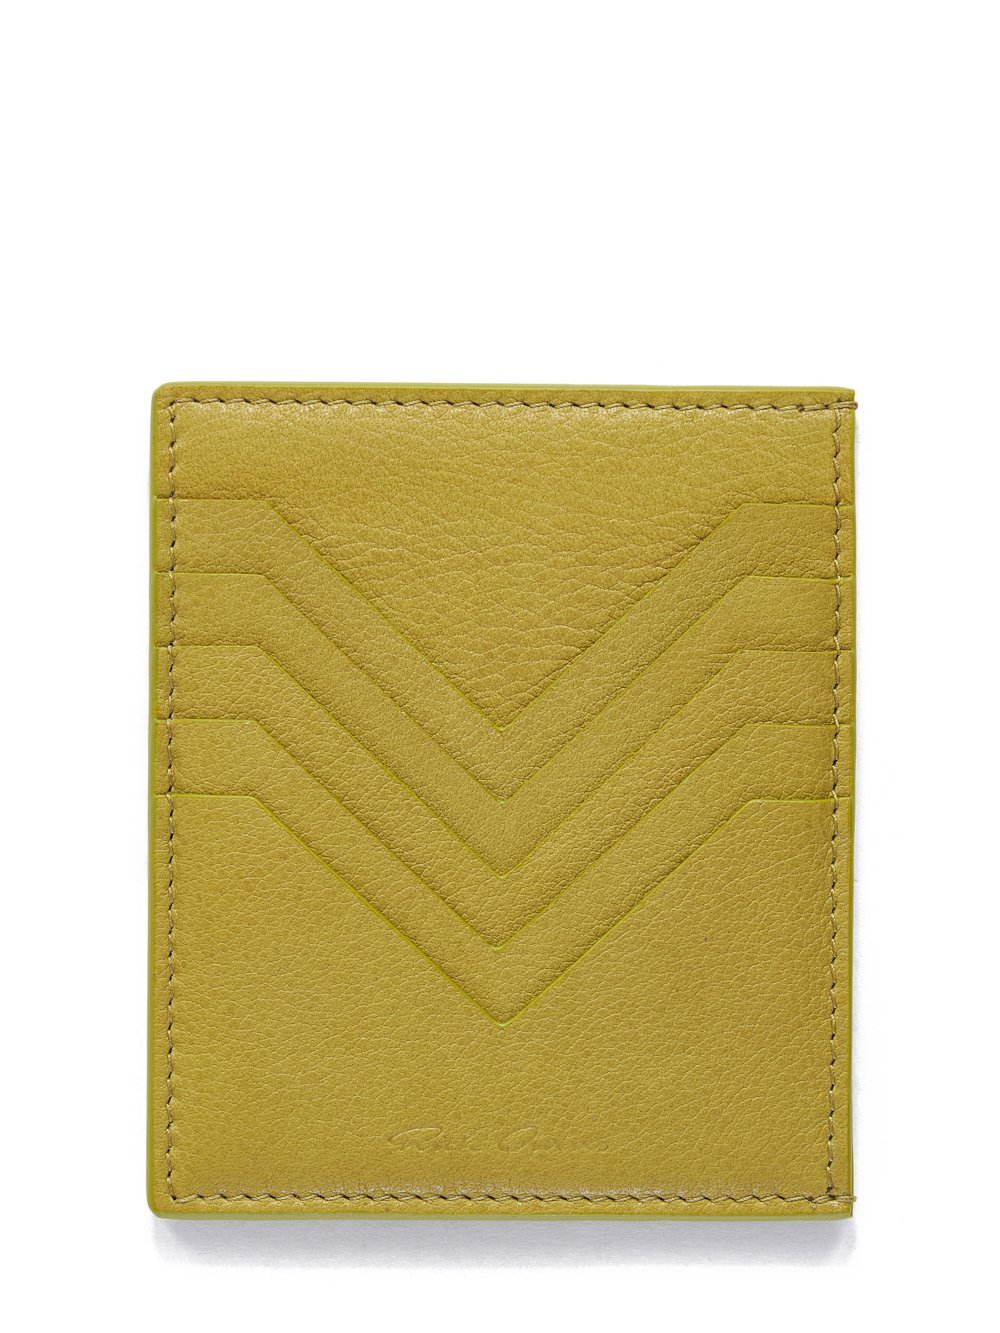 RICK OWENS FW23 LUXOR SQUARE CC HOLDER IN ACID YELLOW SOFT GRAIN COW LEATHER